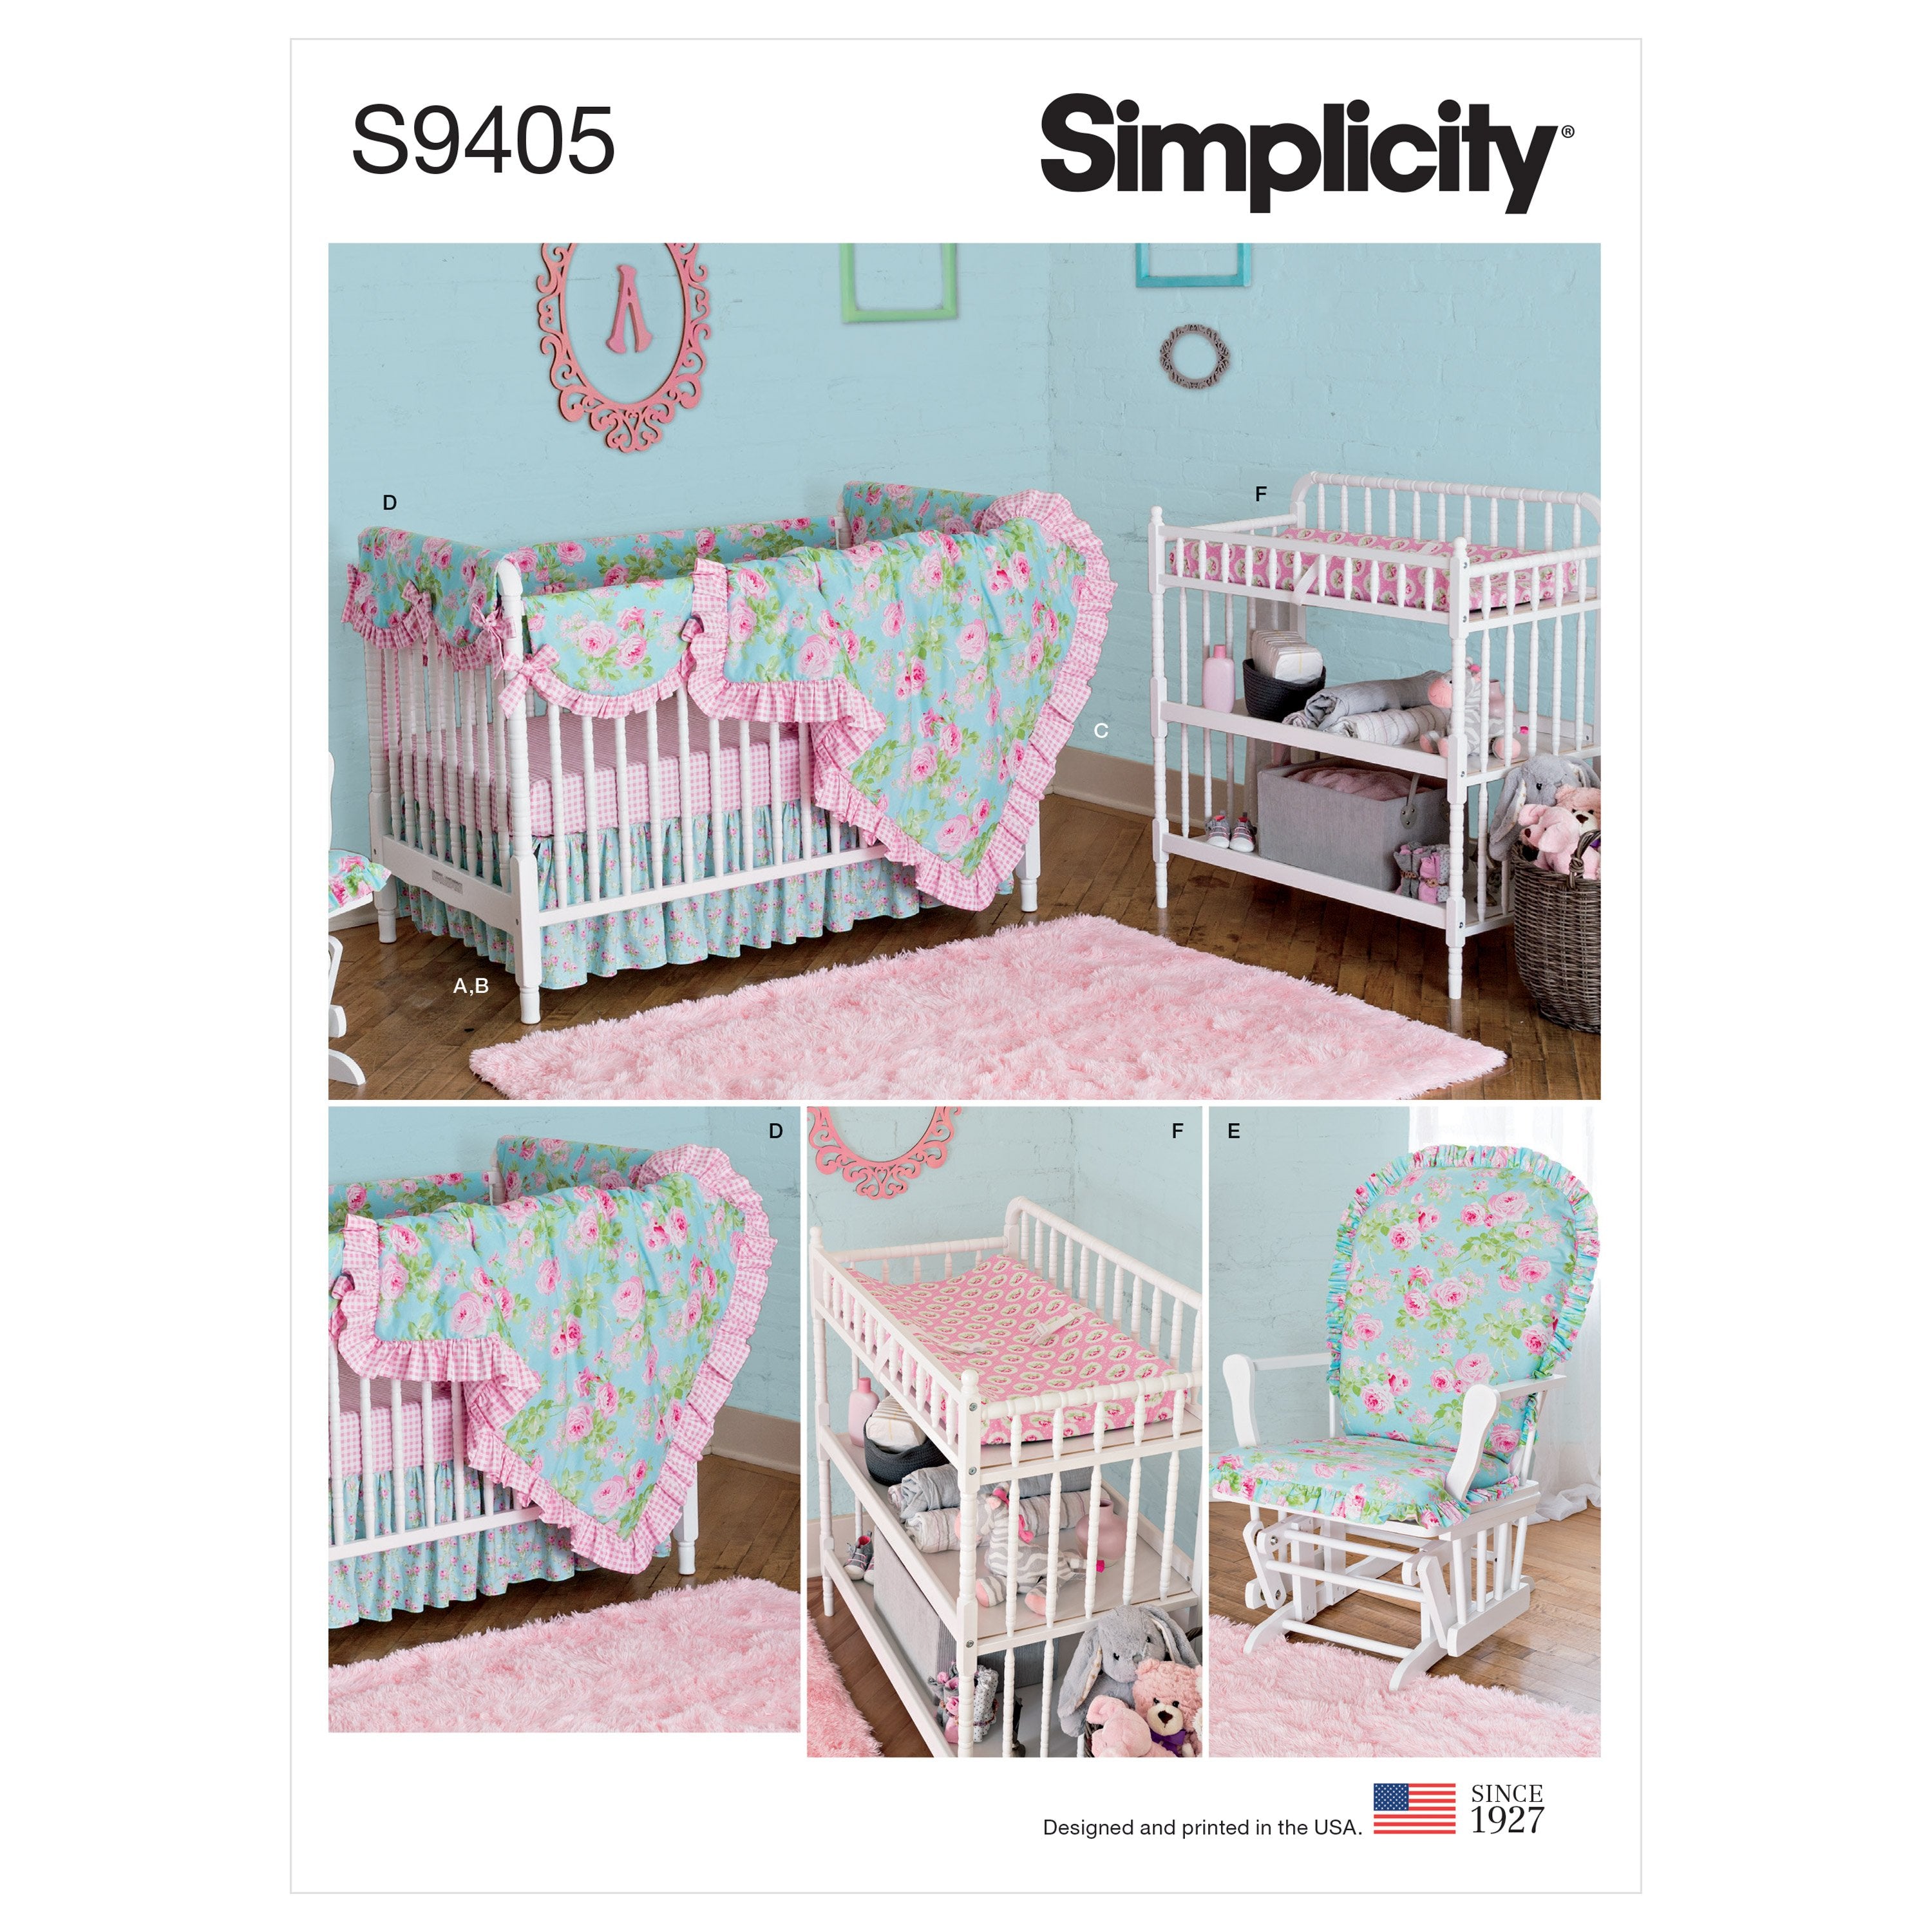 Simplicity Sewing Pattern 9405 Nursery Décor from Jaycotts Sewing Supplies